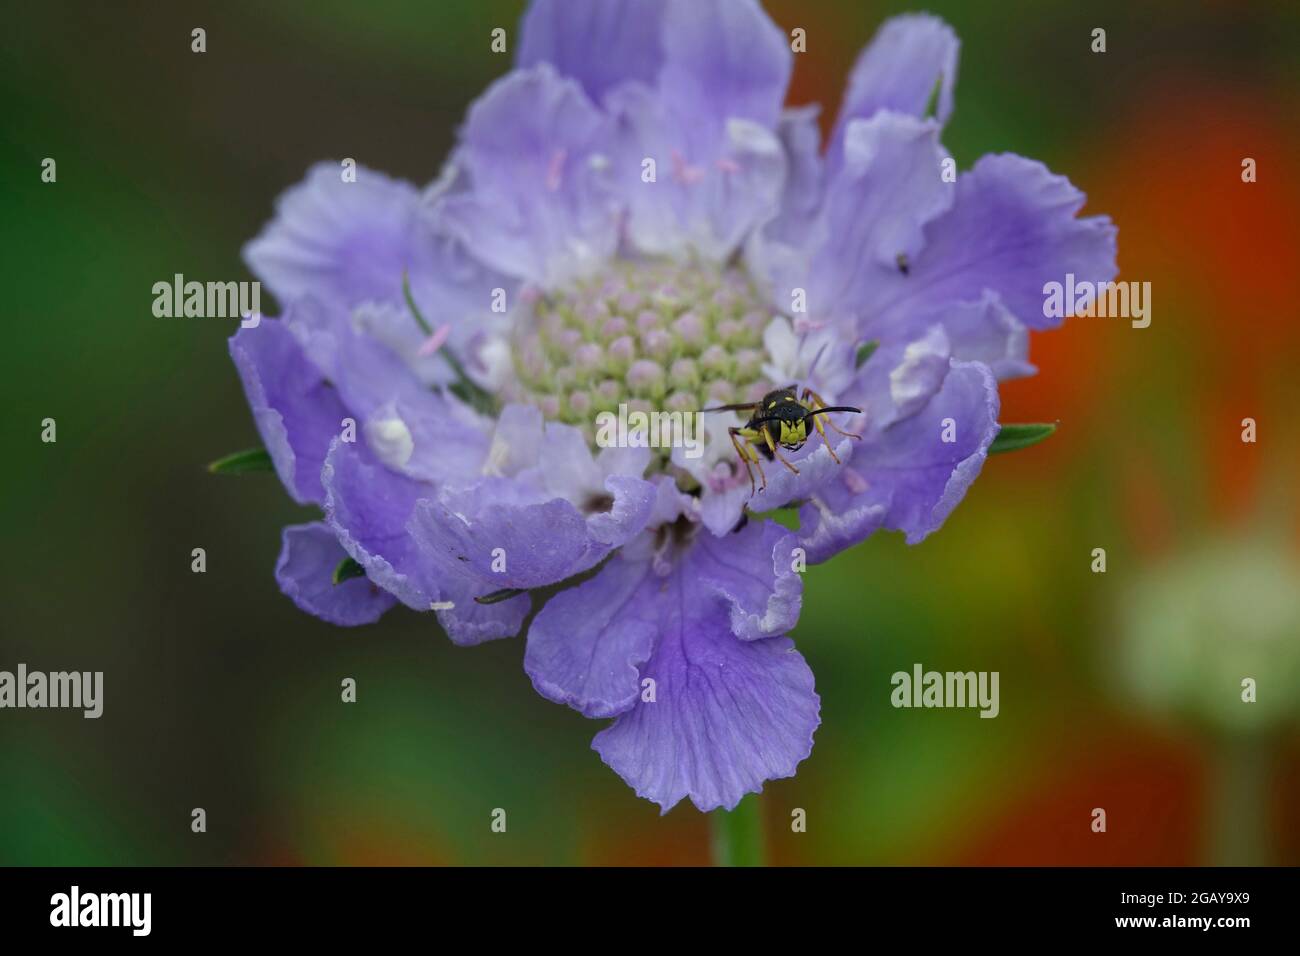 A bee lands on the lavender blue petals that make the Scabiosia caucasica, also known as the pincushion flower. Stock Photo